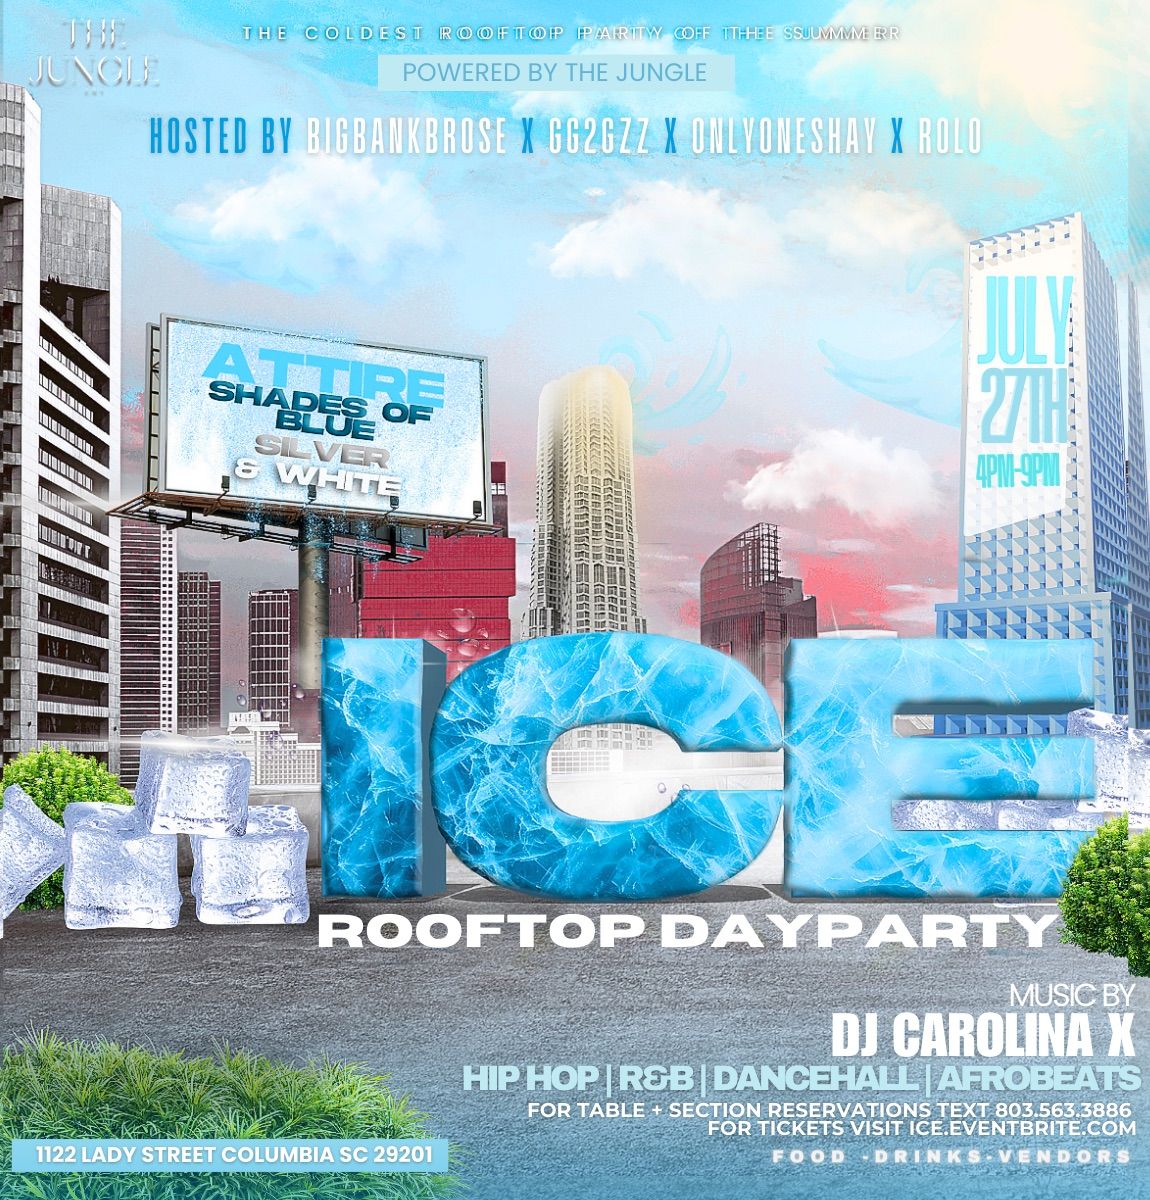 ICE RoofTop DayParty 